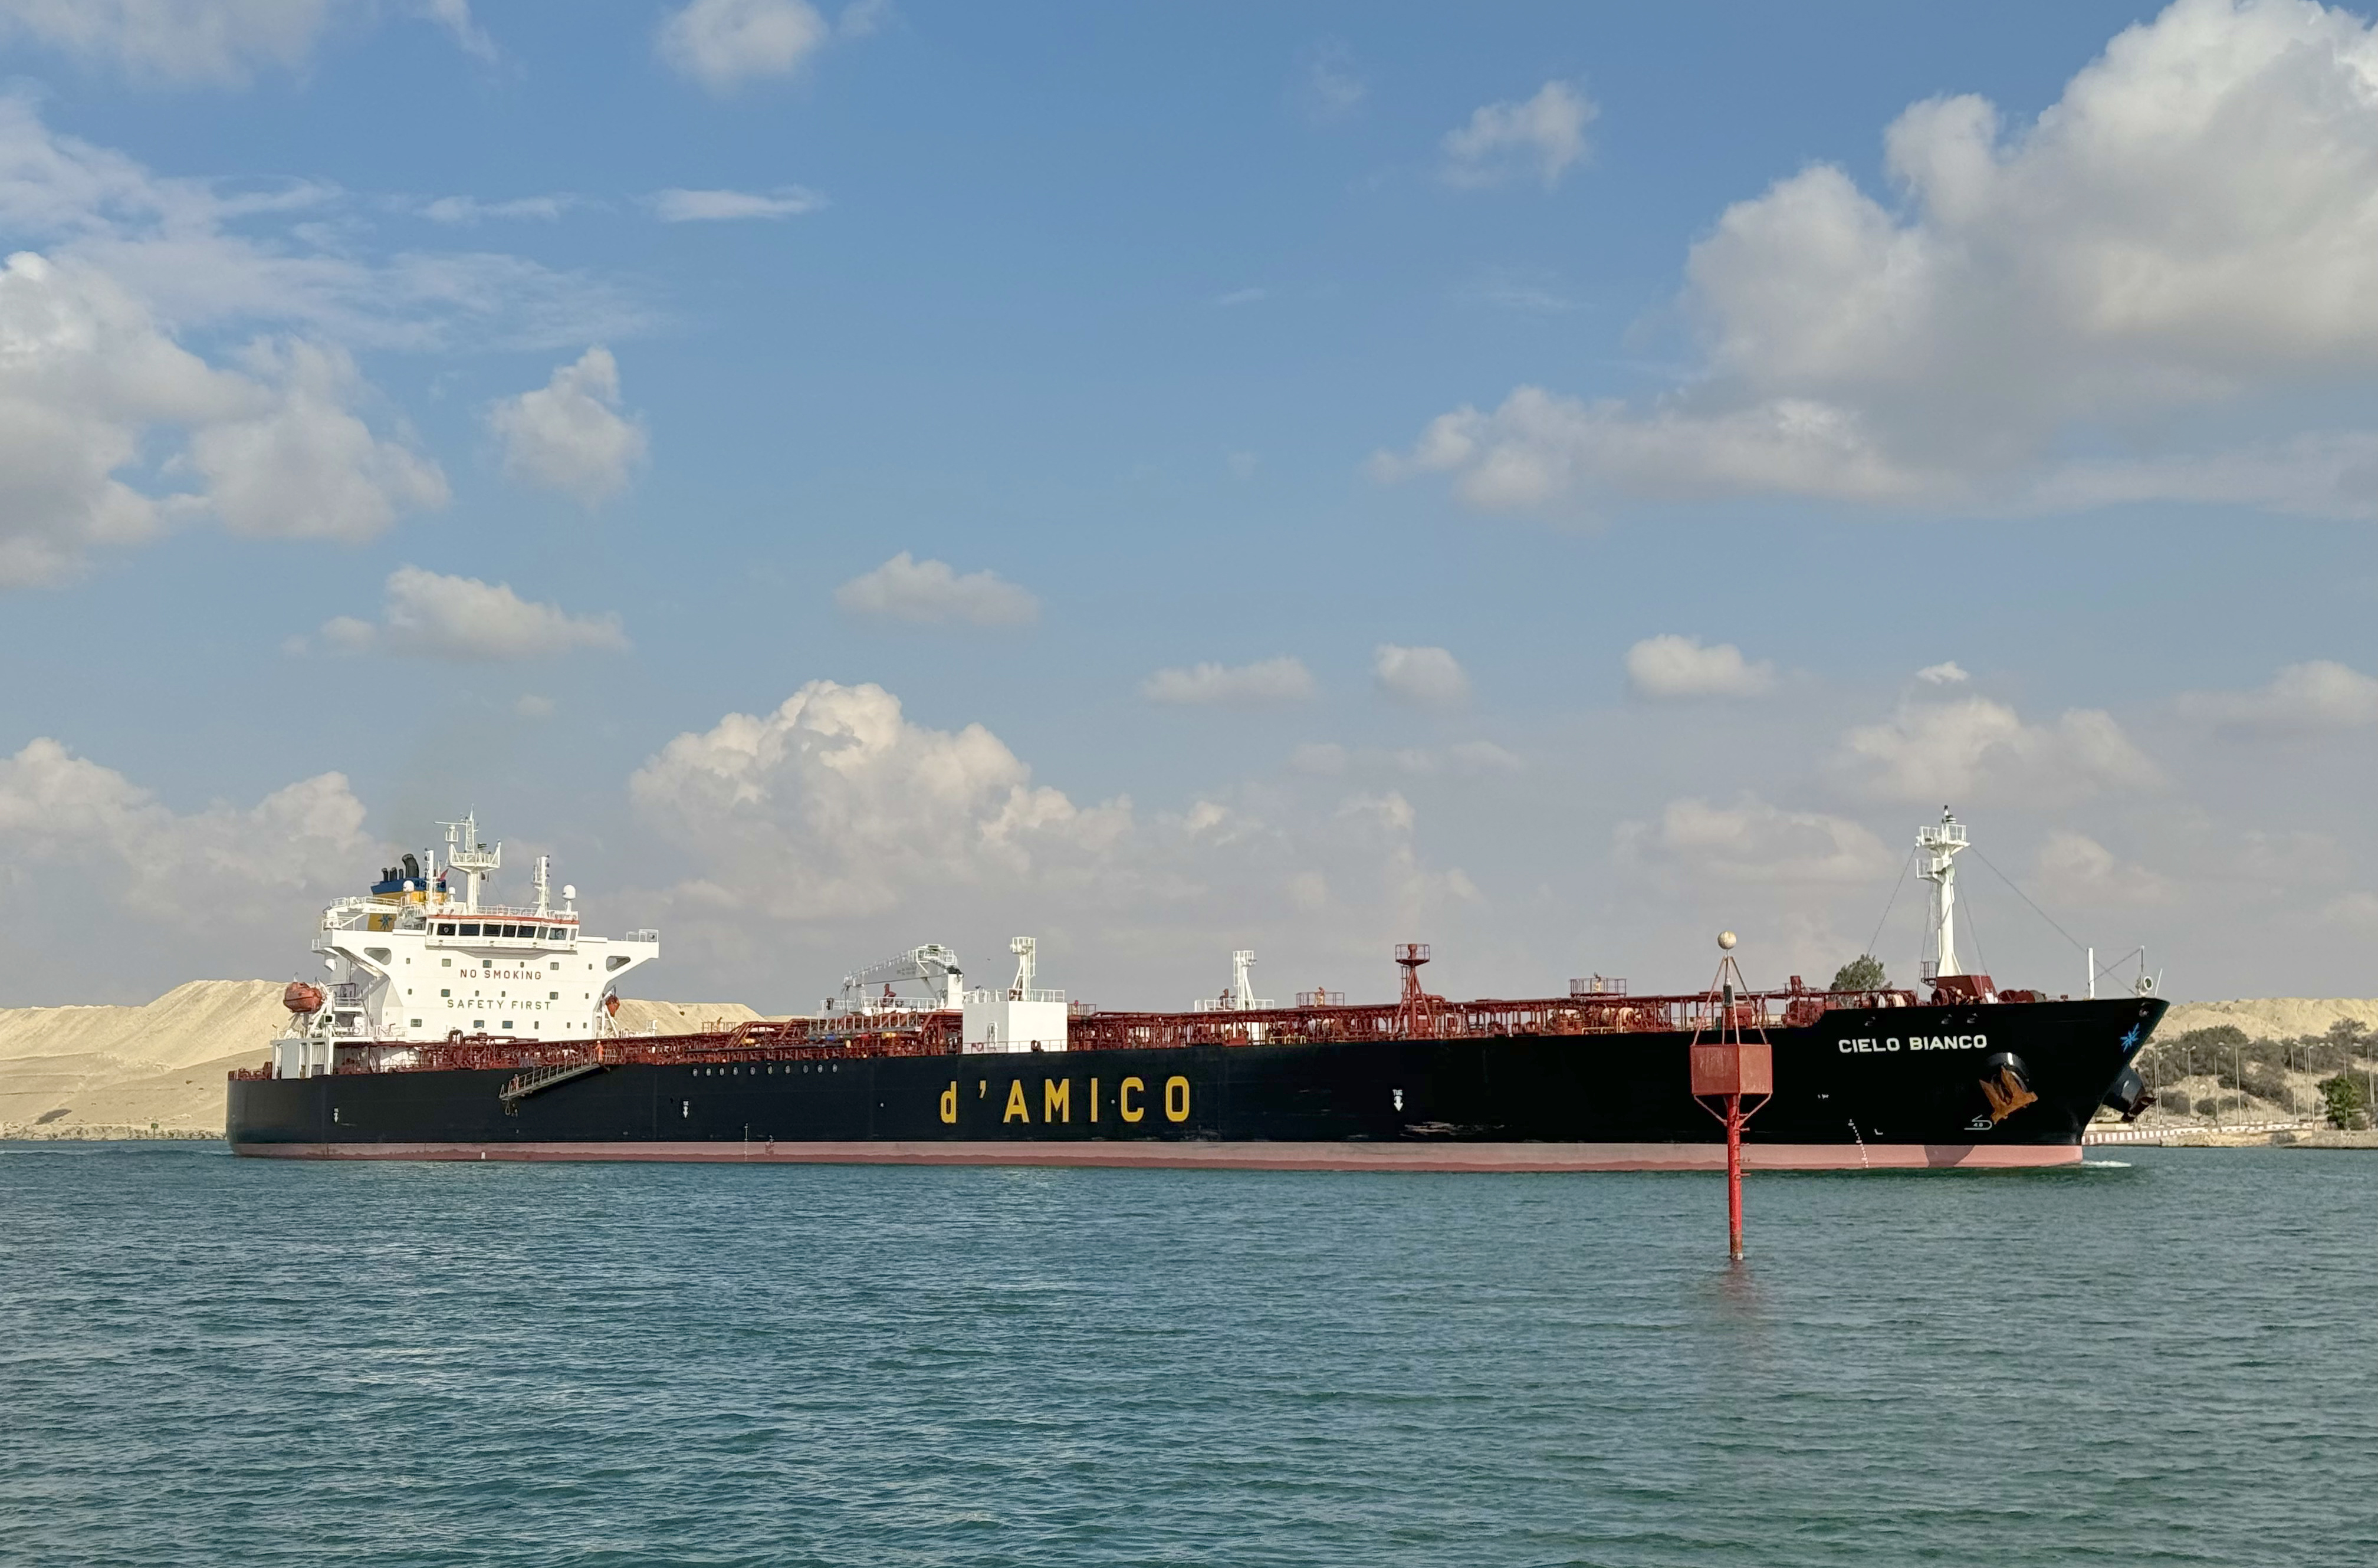 A large black cargo ship floats on calm water, a sandy shore visible in the distance.